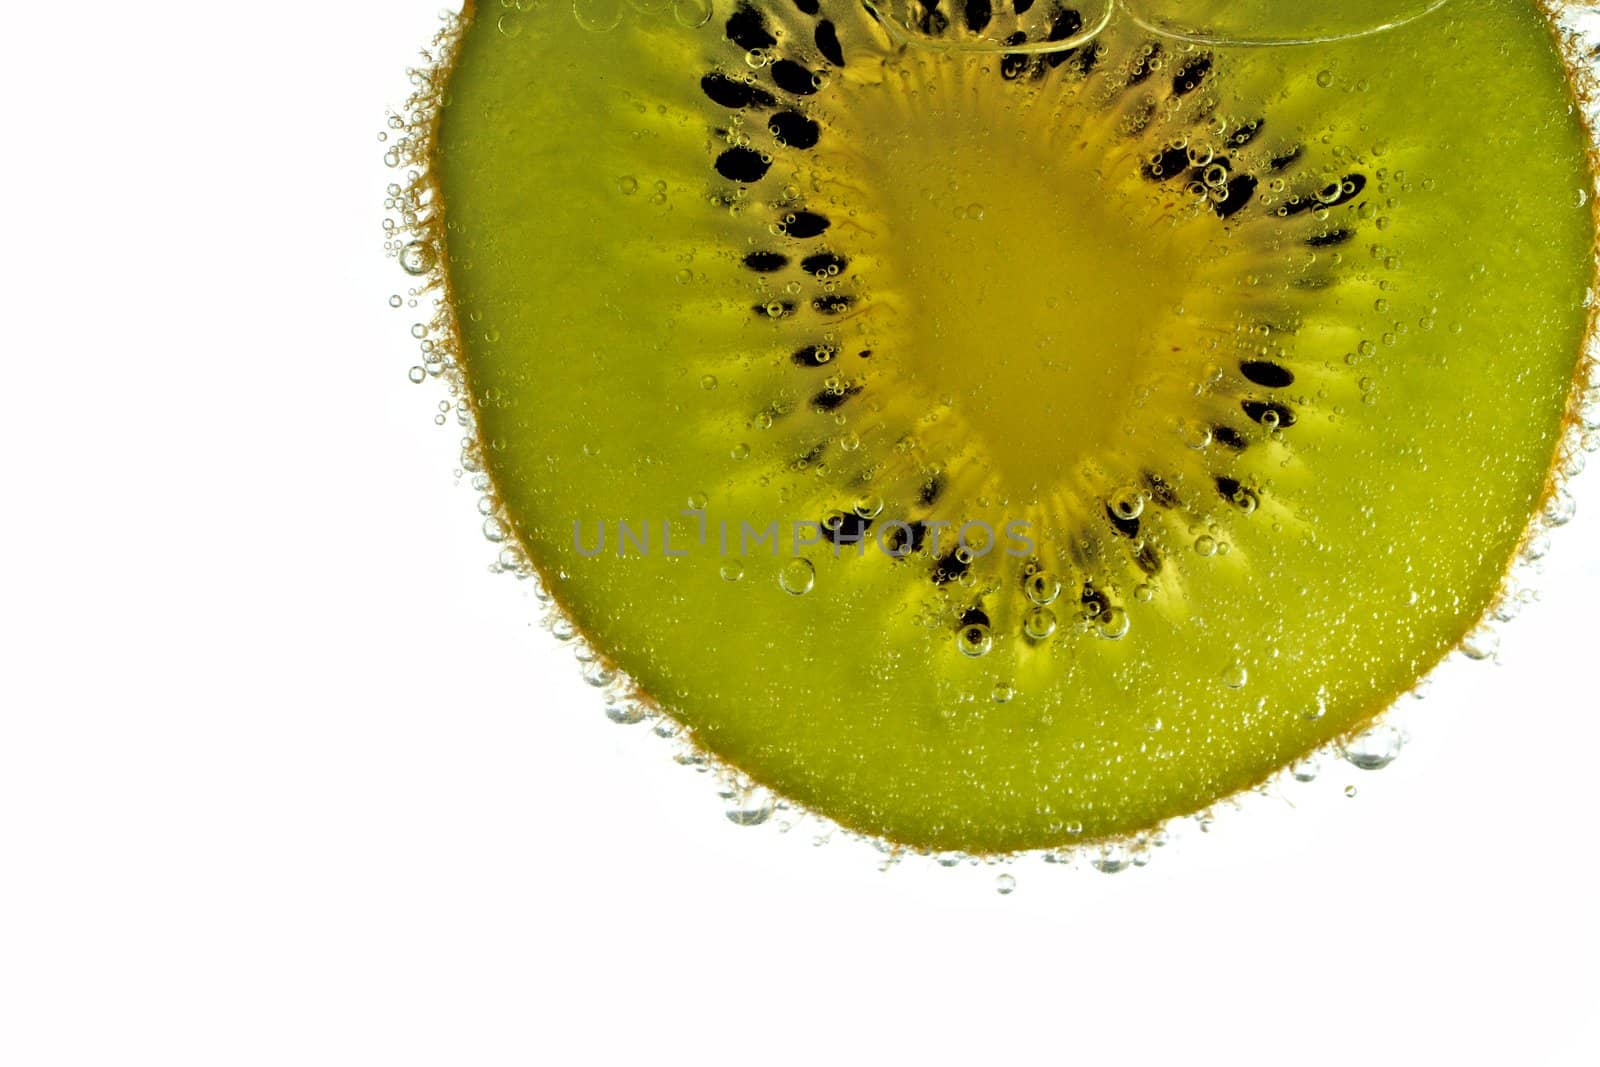 A fresh kiwi slice floats in carbonated water, backlit on white